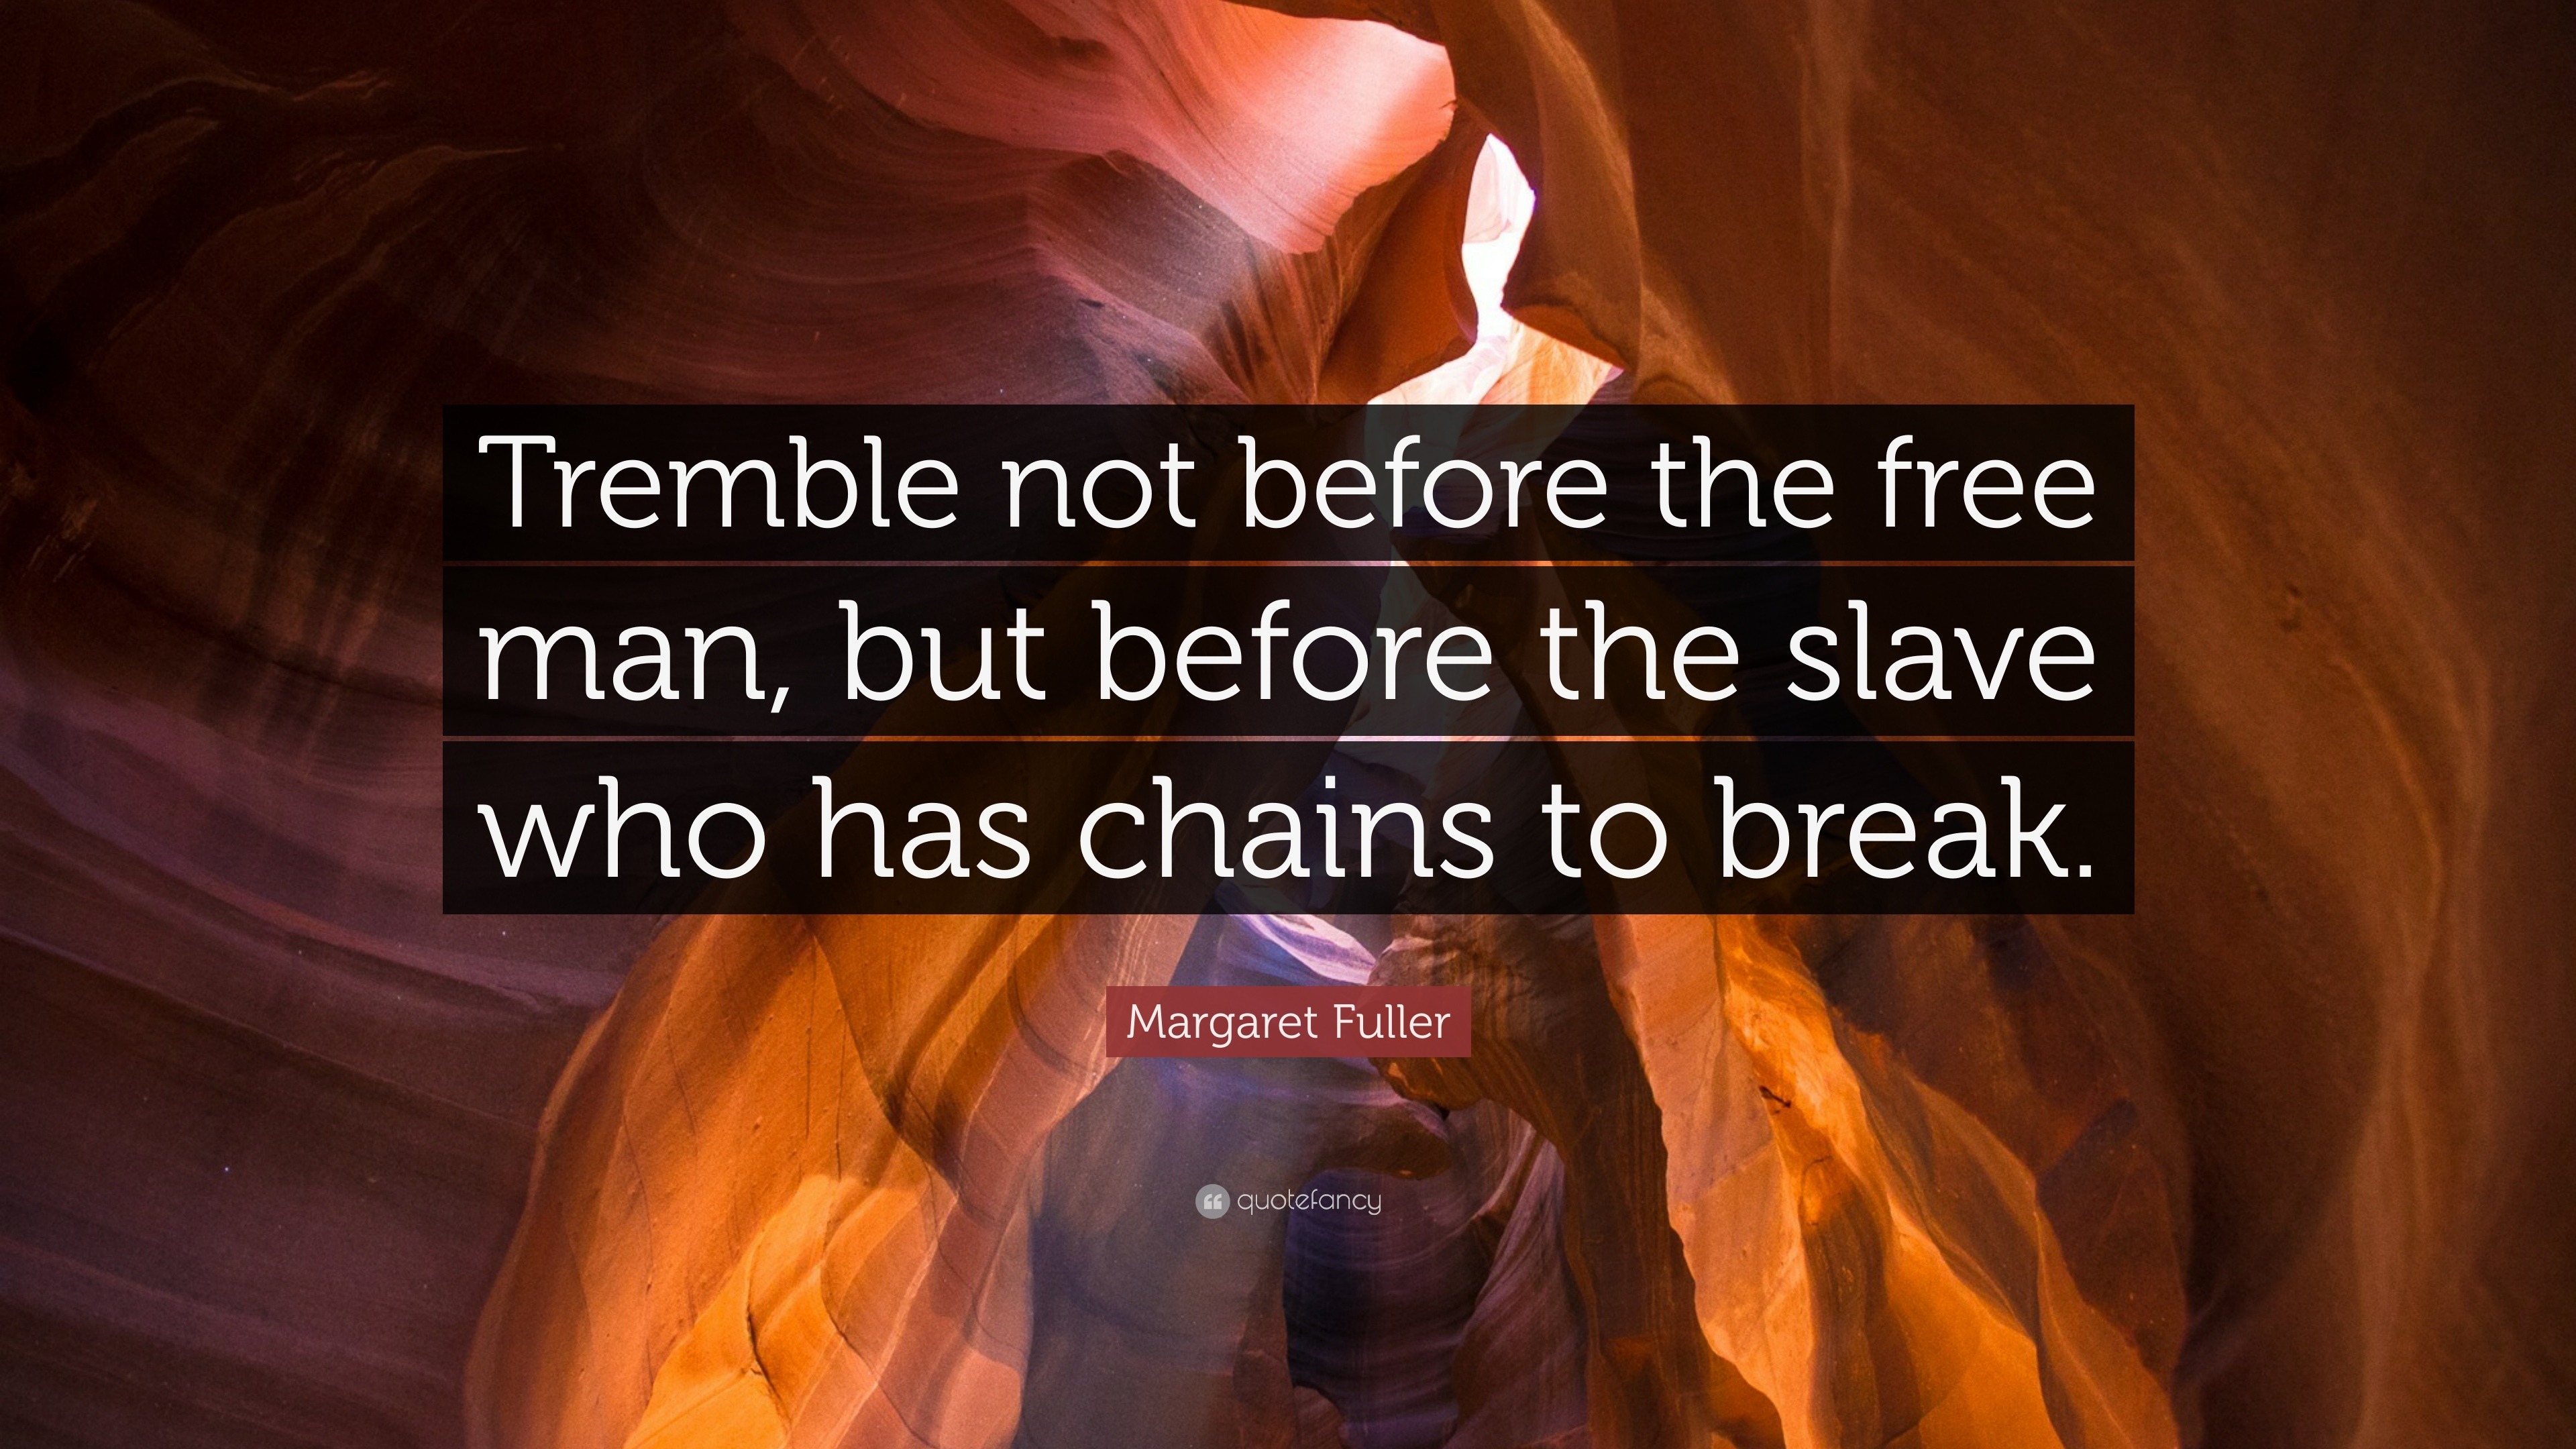 Margaret Fuller Quote: “Tremble not before the free man, but before the ...